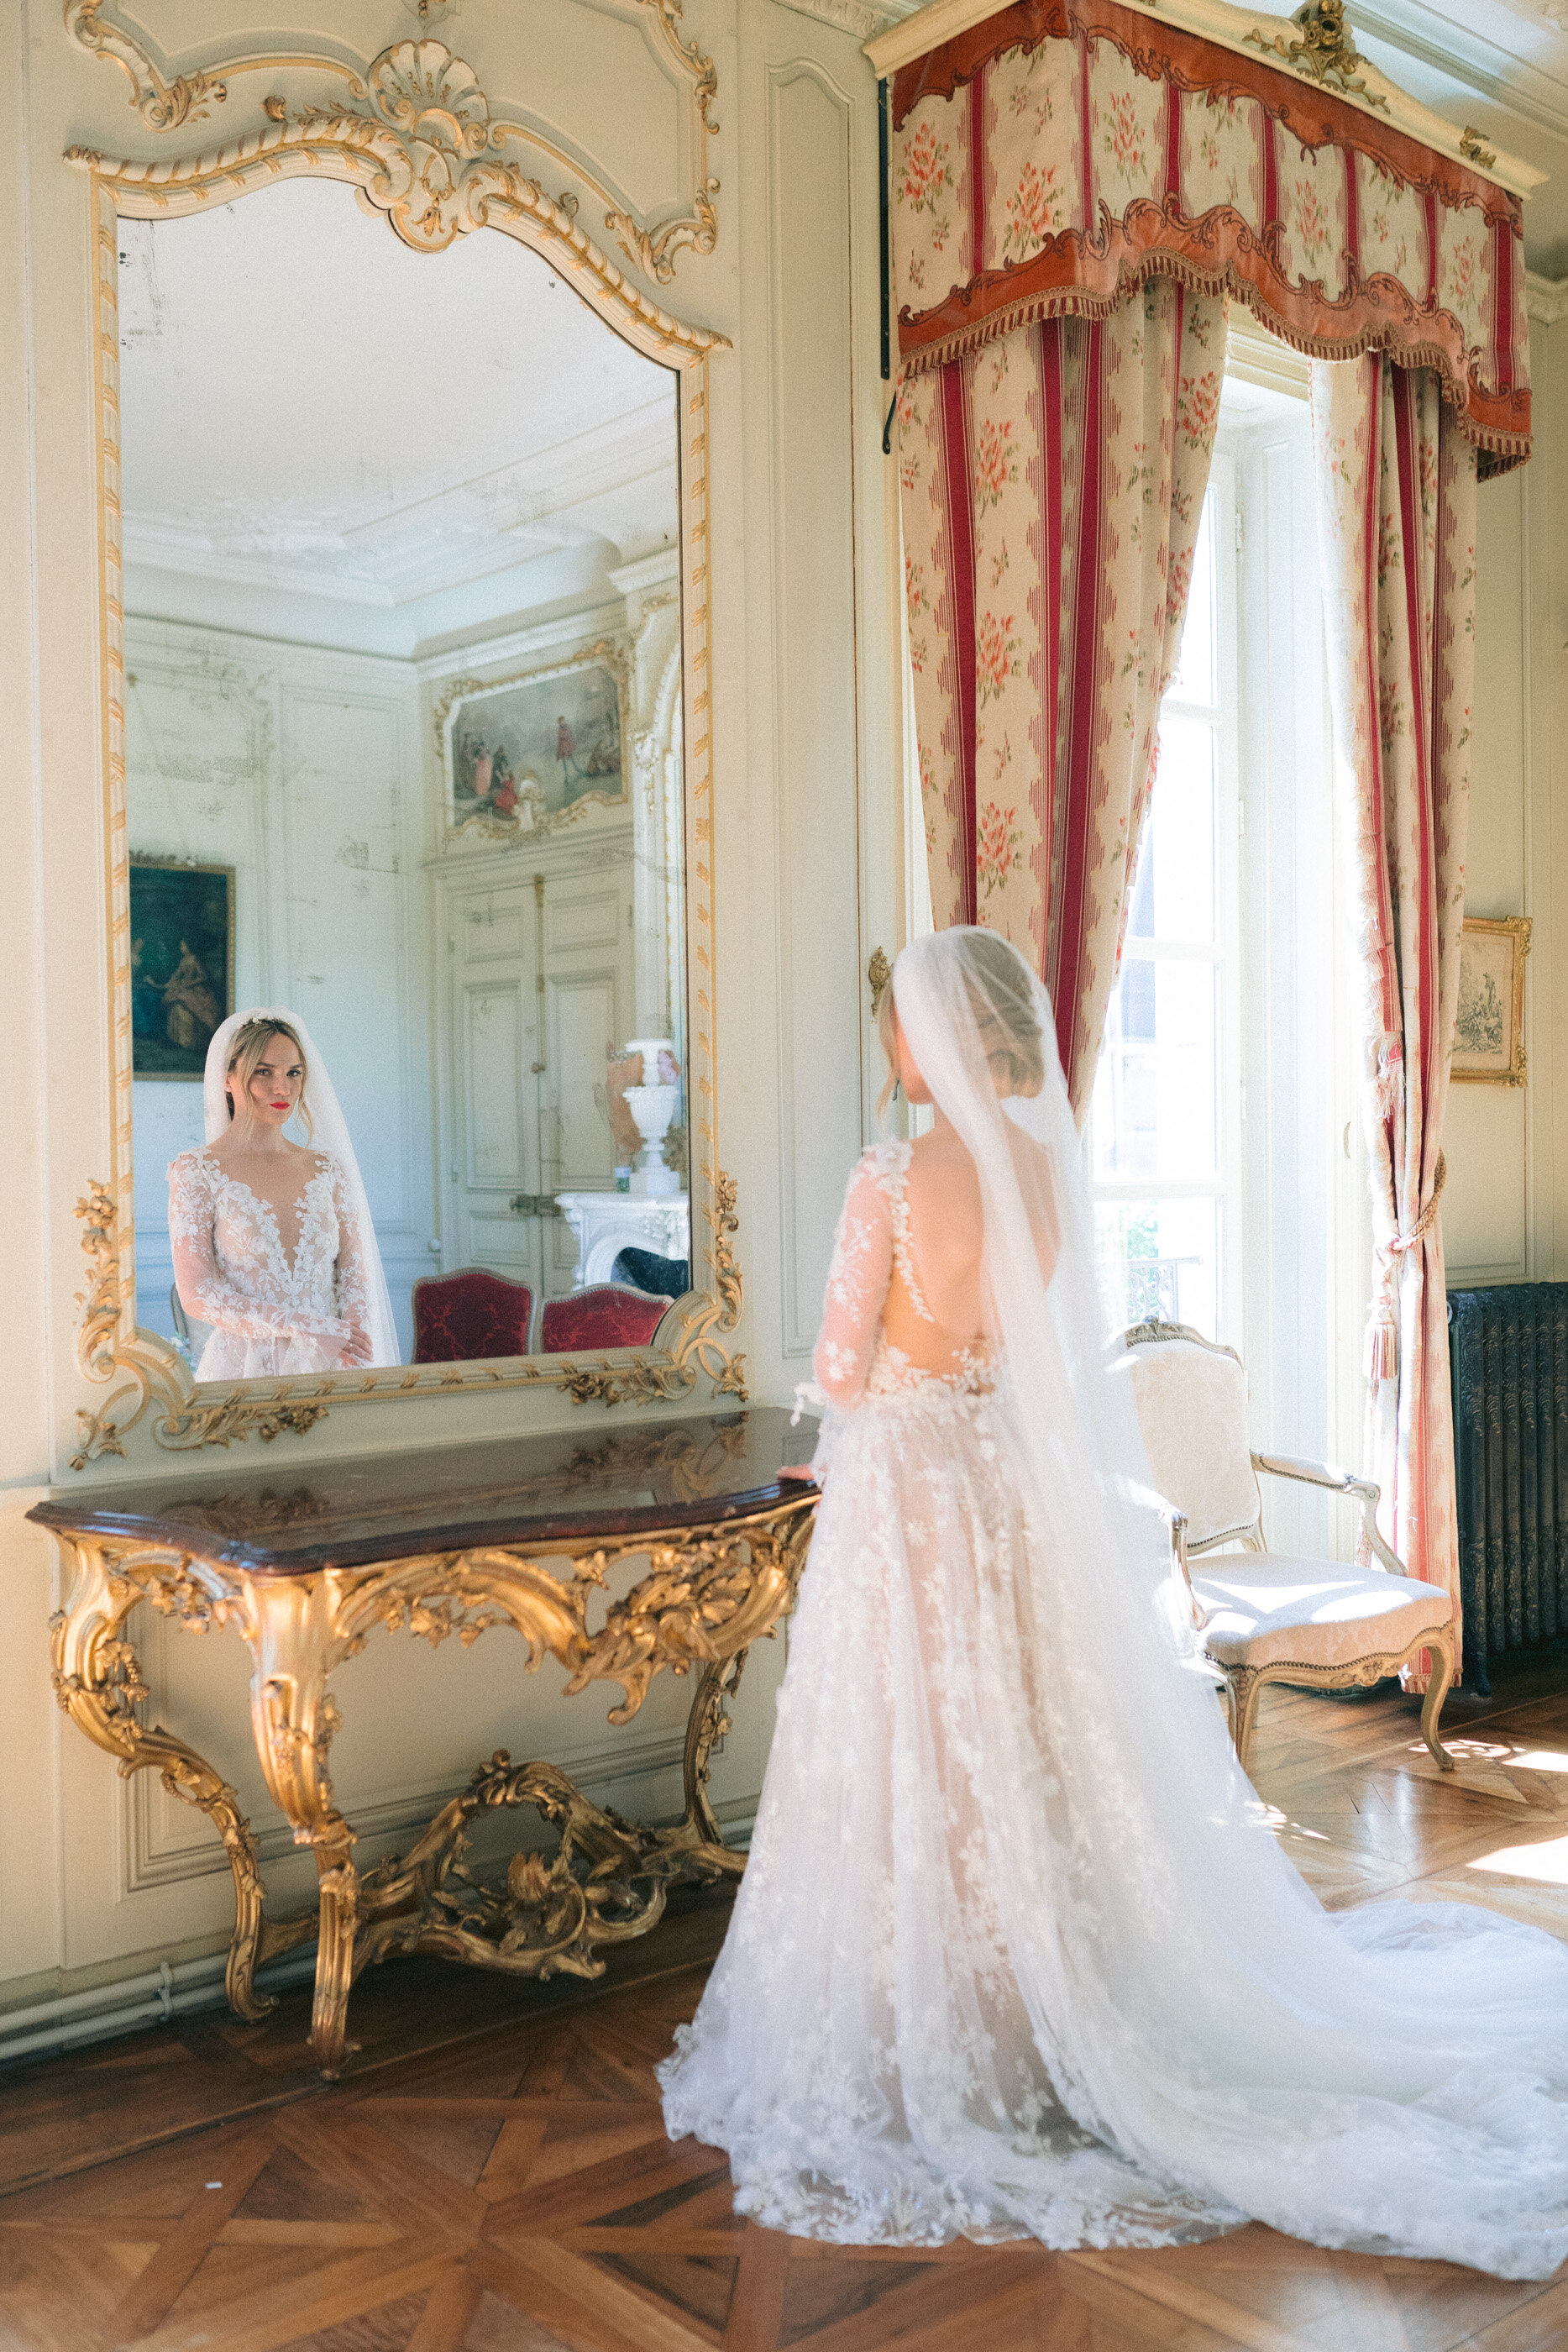 lucy-till-french-weddings-burgundy-wedding-chateau-de-varennes-wedding-planner-south-of-france-french-riviera-provence-alps-italy-lake-como.jpg